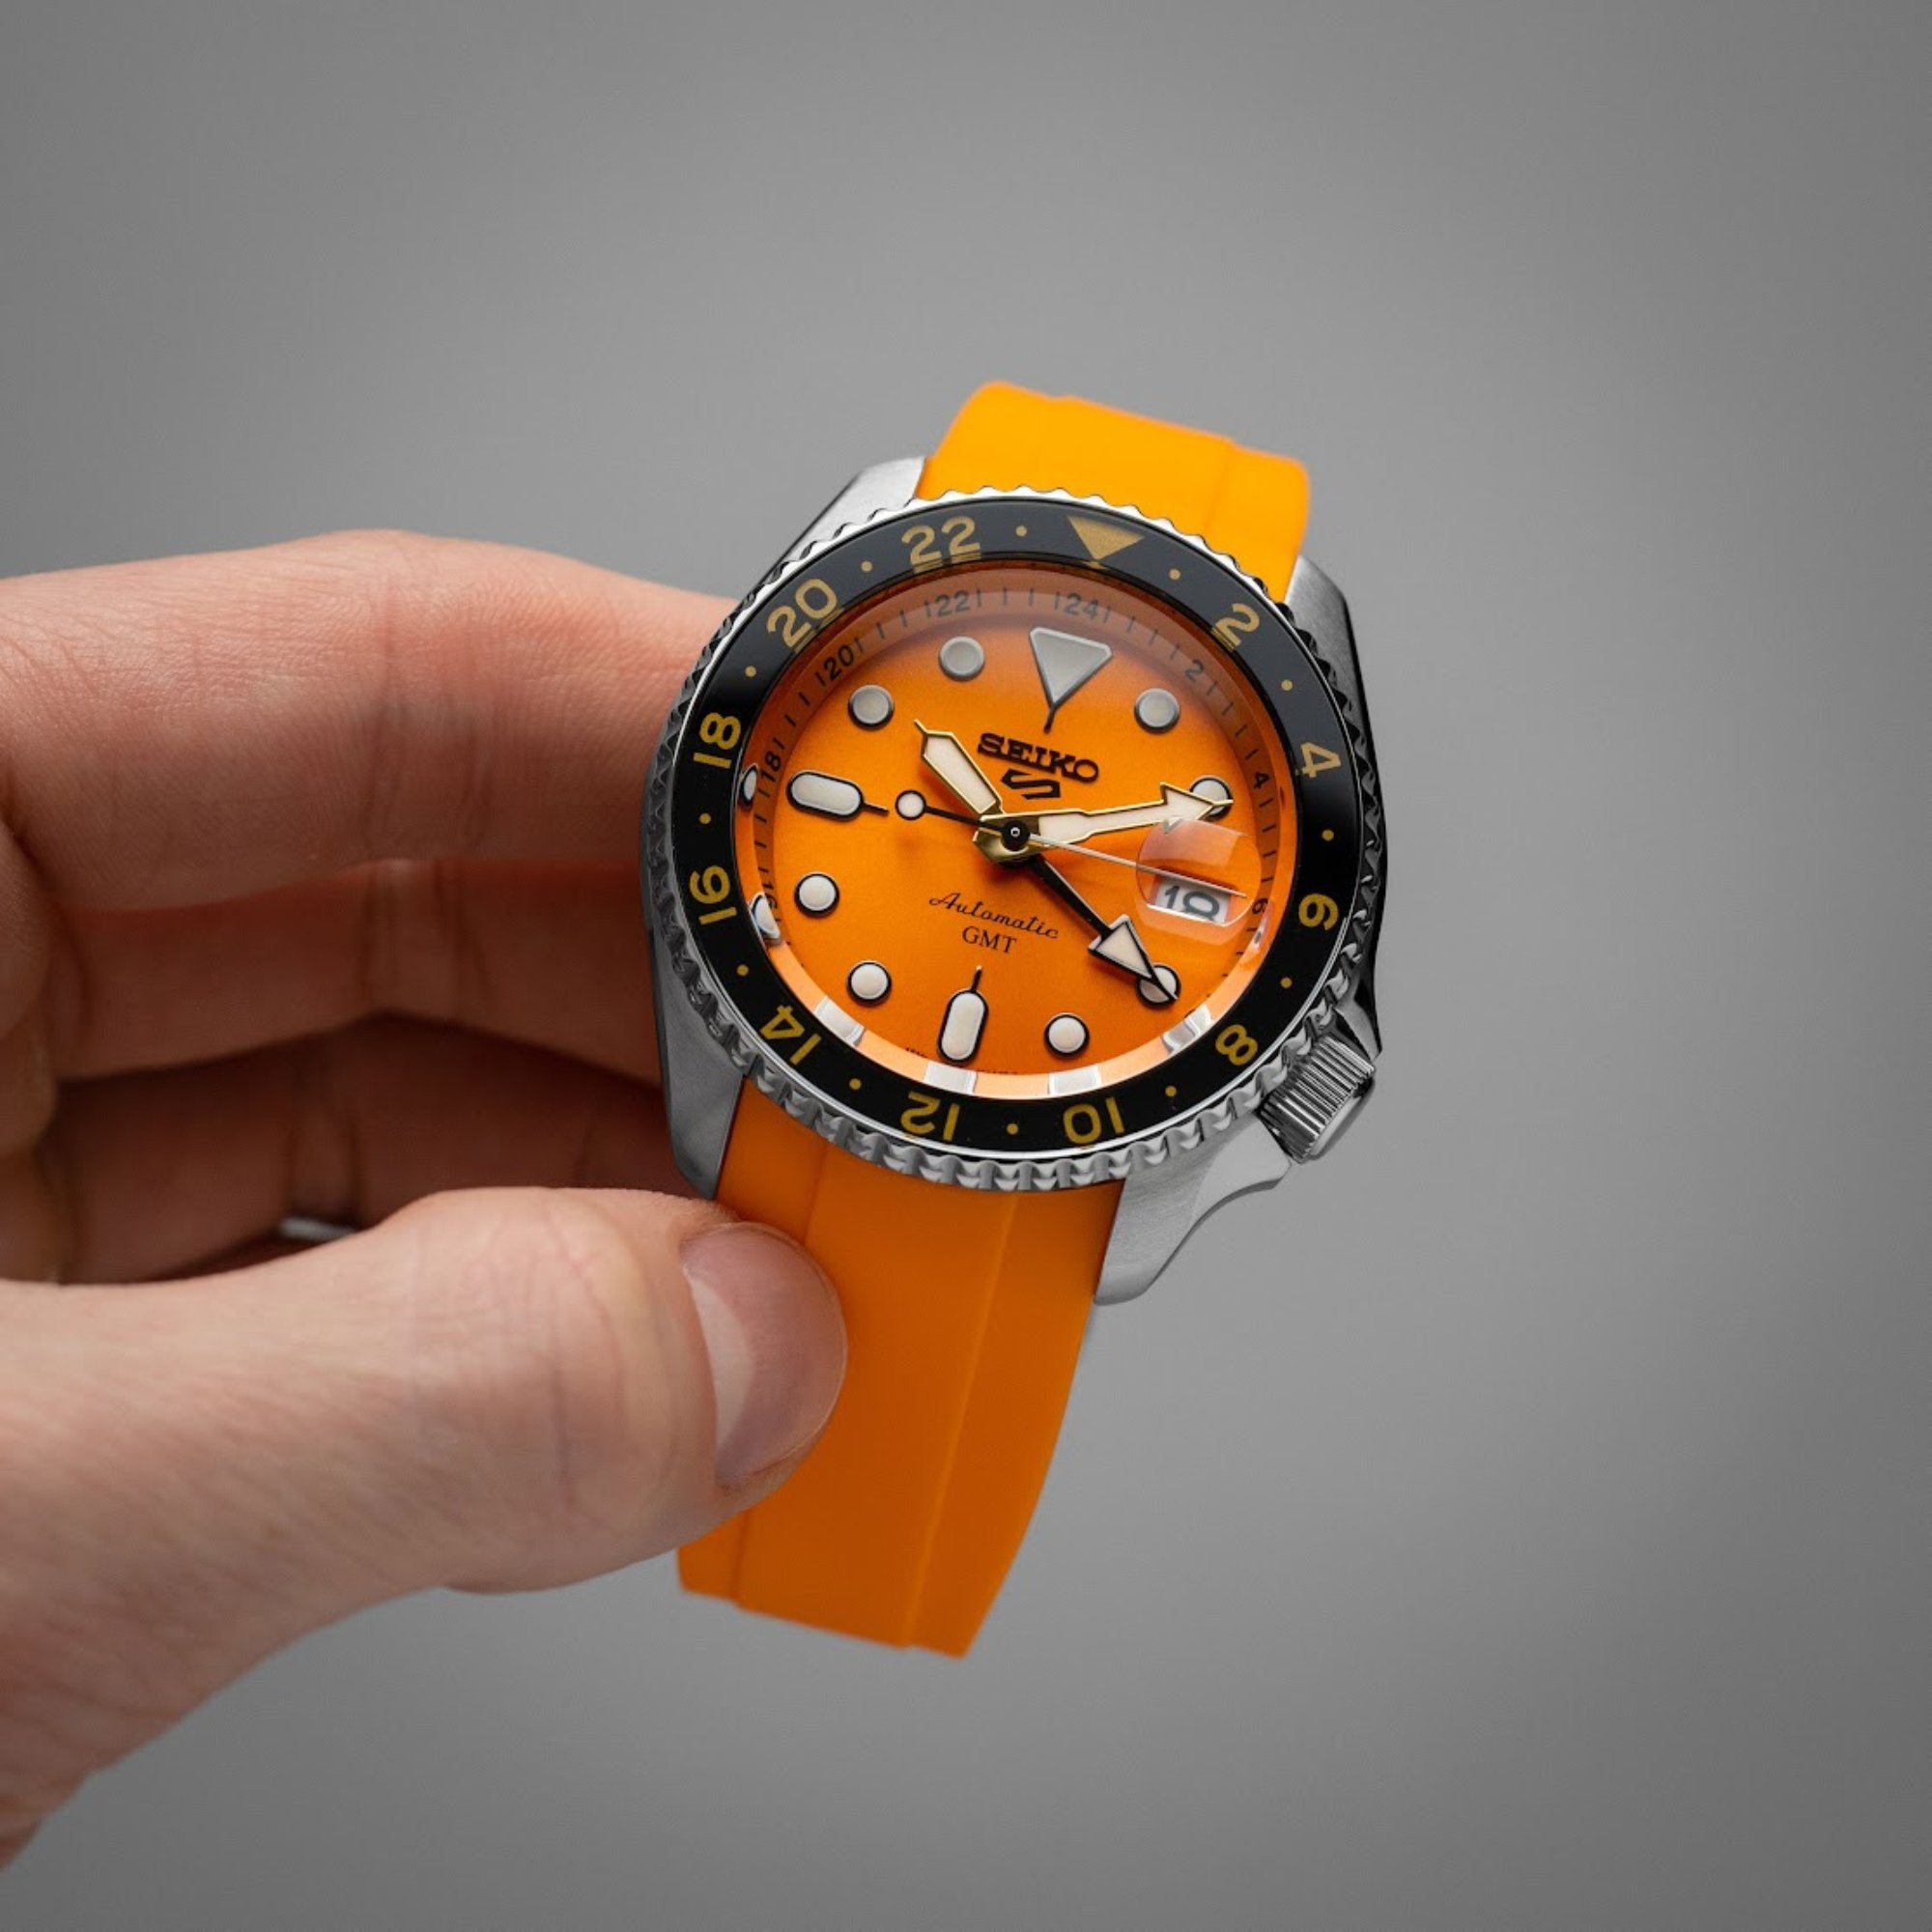 Curved End Soft Silicone Strap - Compatible with Seiko Sports – Orange (2418) -StrapSeeker